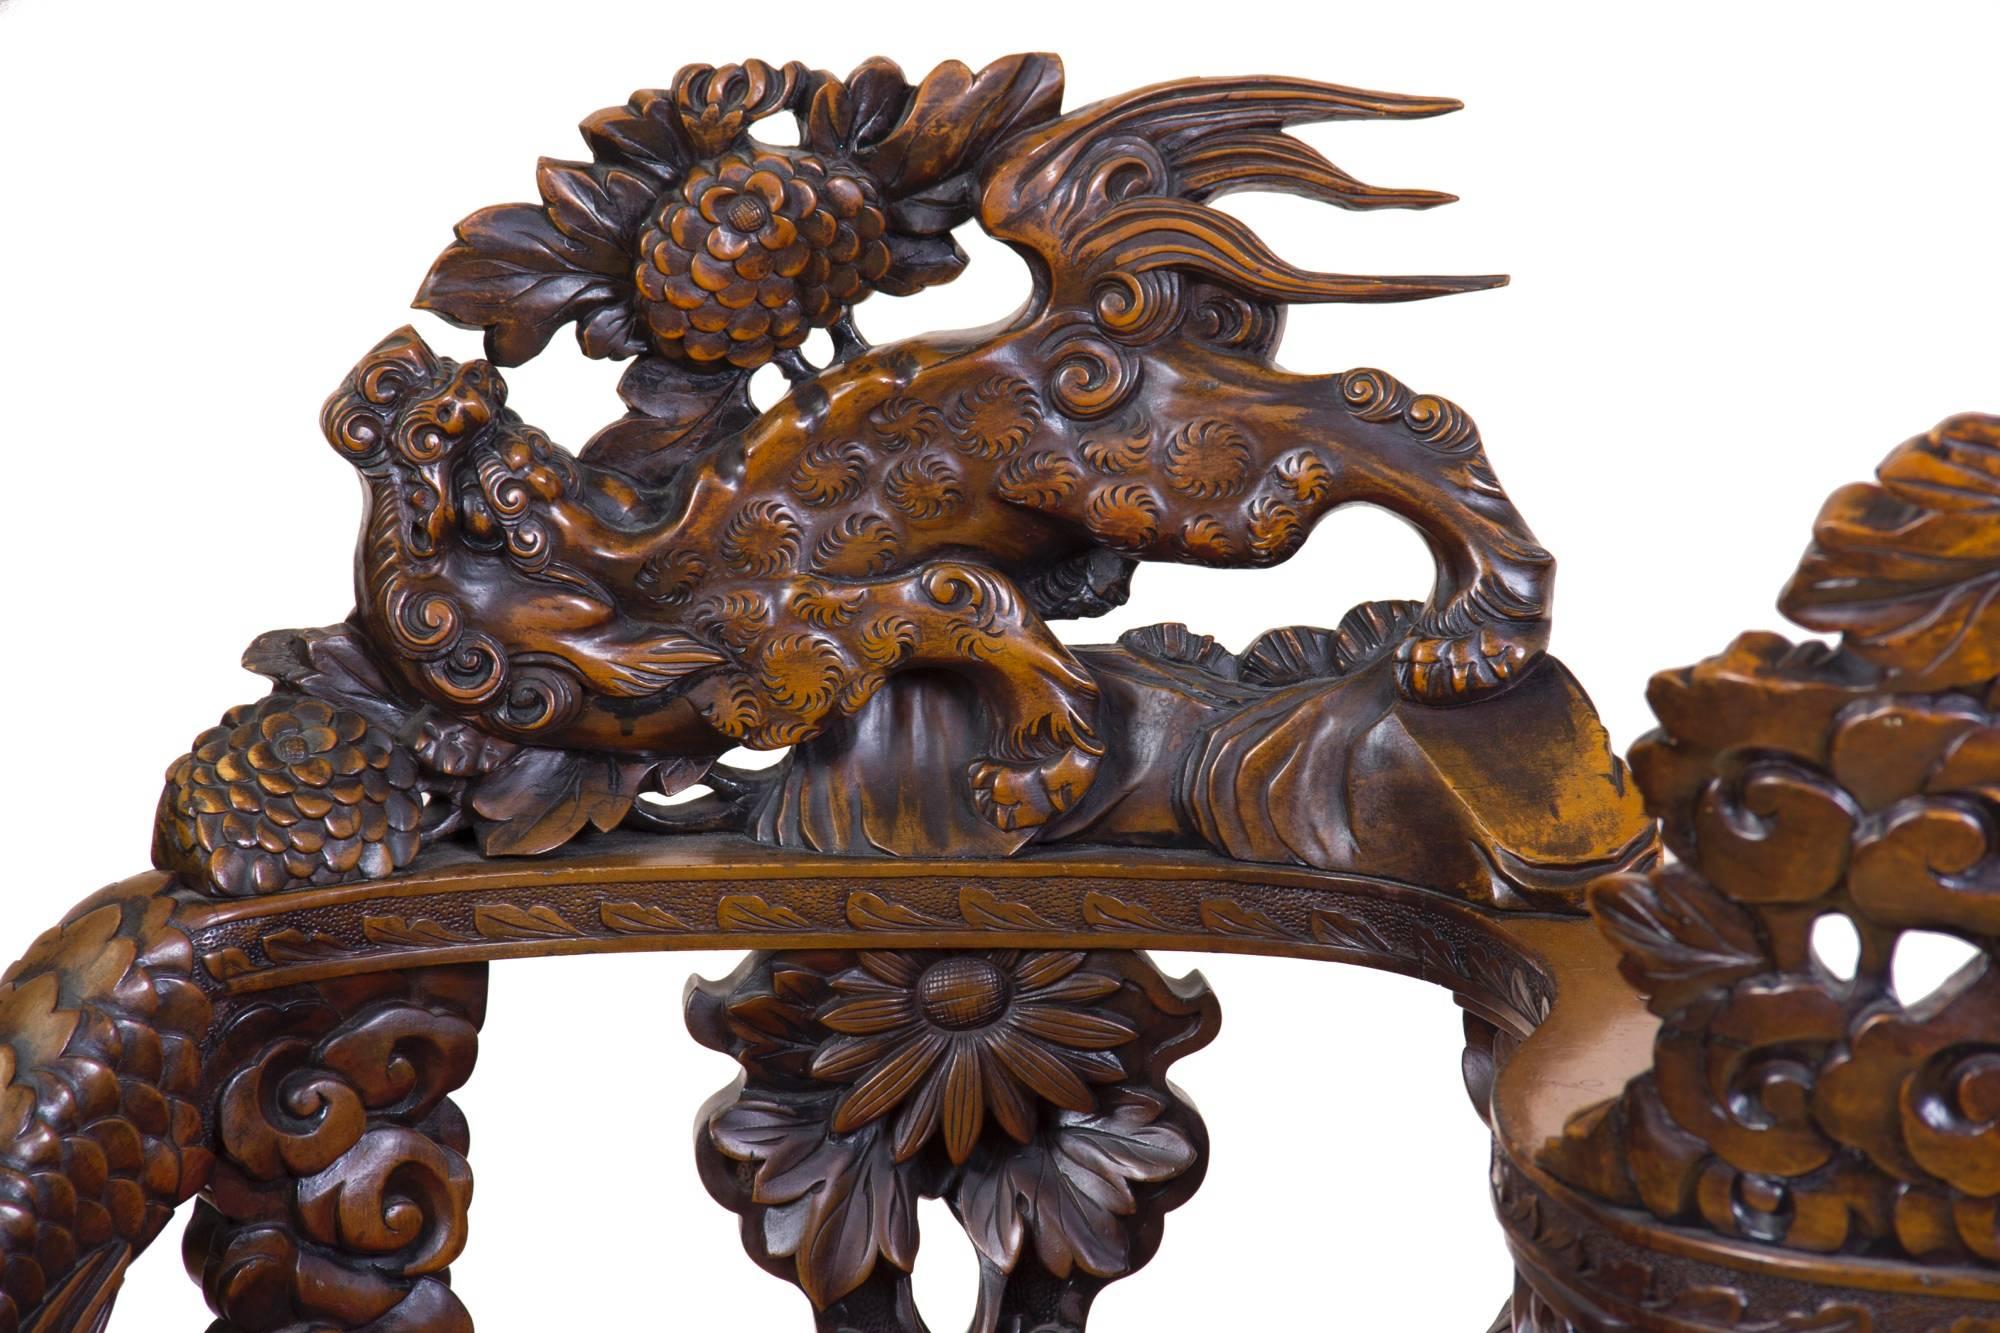 The tête-à-tête form appears in the latter part of the 19th century, a Victorian motif that here is expressed in the Japanese style, and of Japanese workmanship.

This tête-à-tête is a tour de force of the best carving, that is fully developed